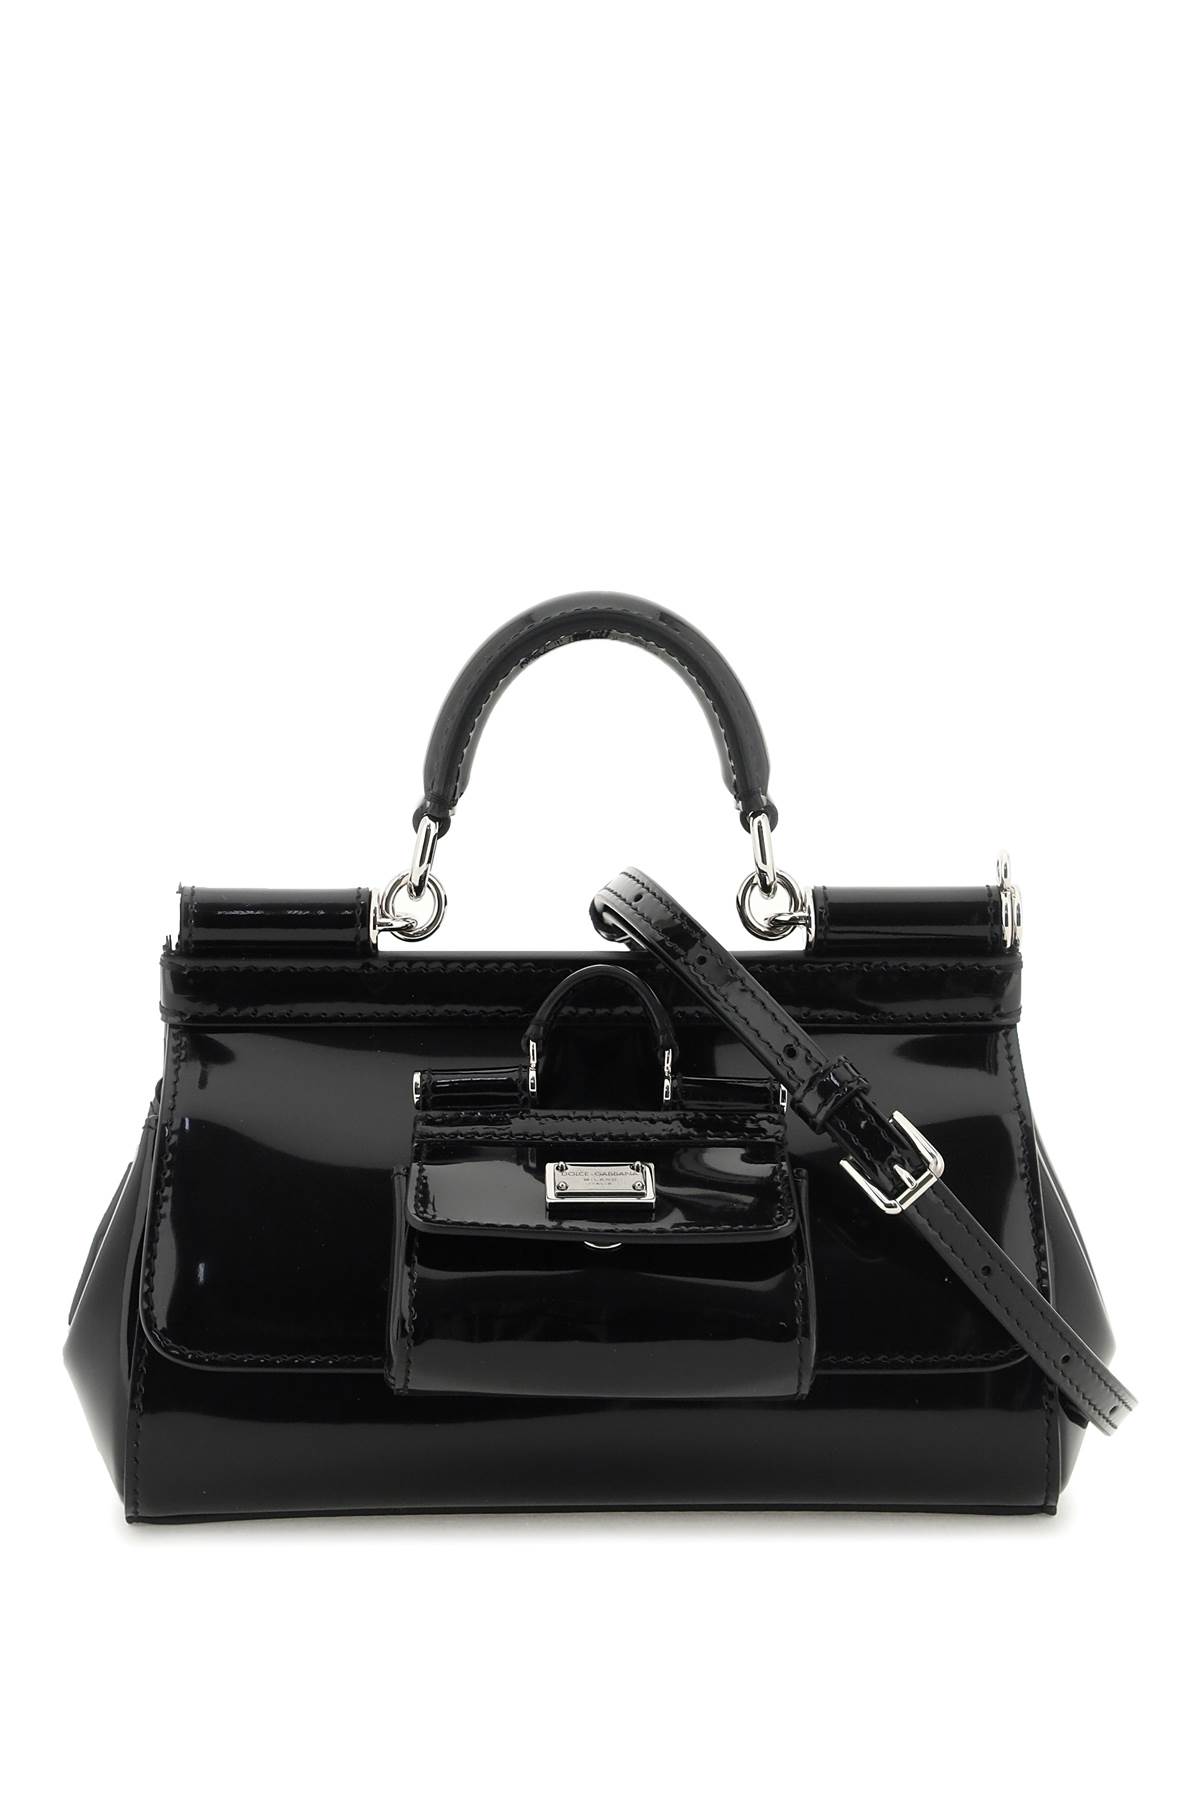 Dolce & Gabbana Patent Leather Small Sicily Bag With Coin Purse In Black